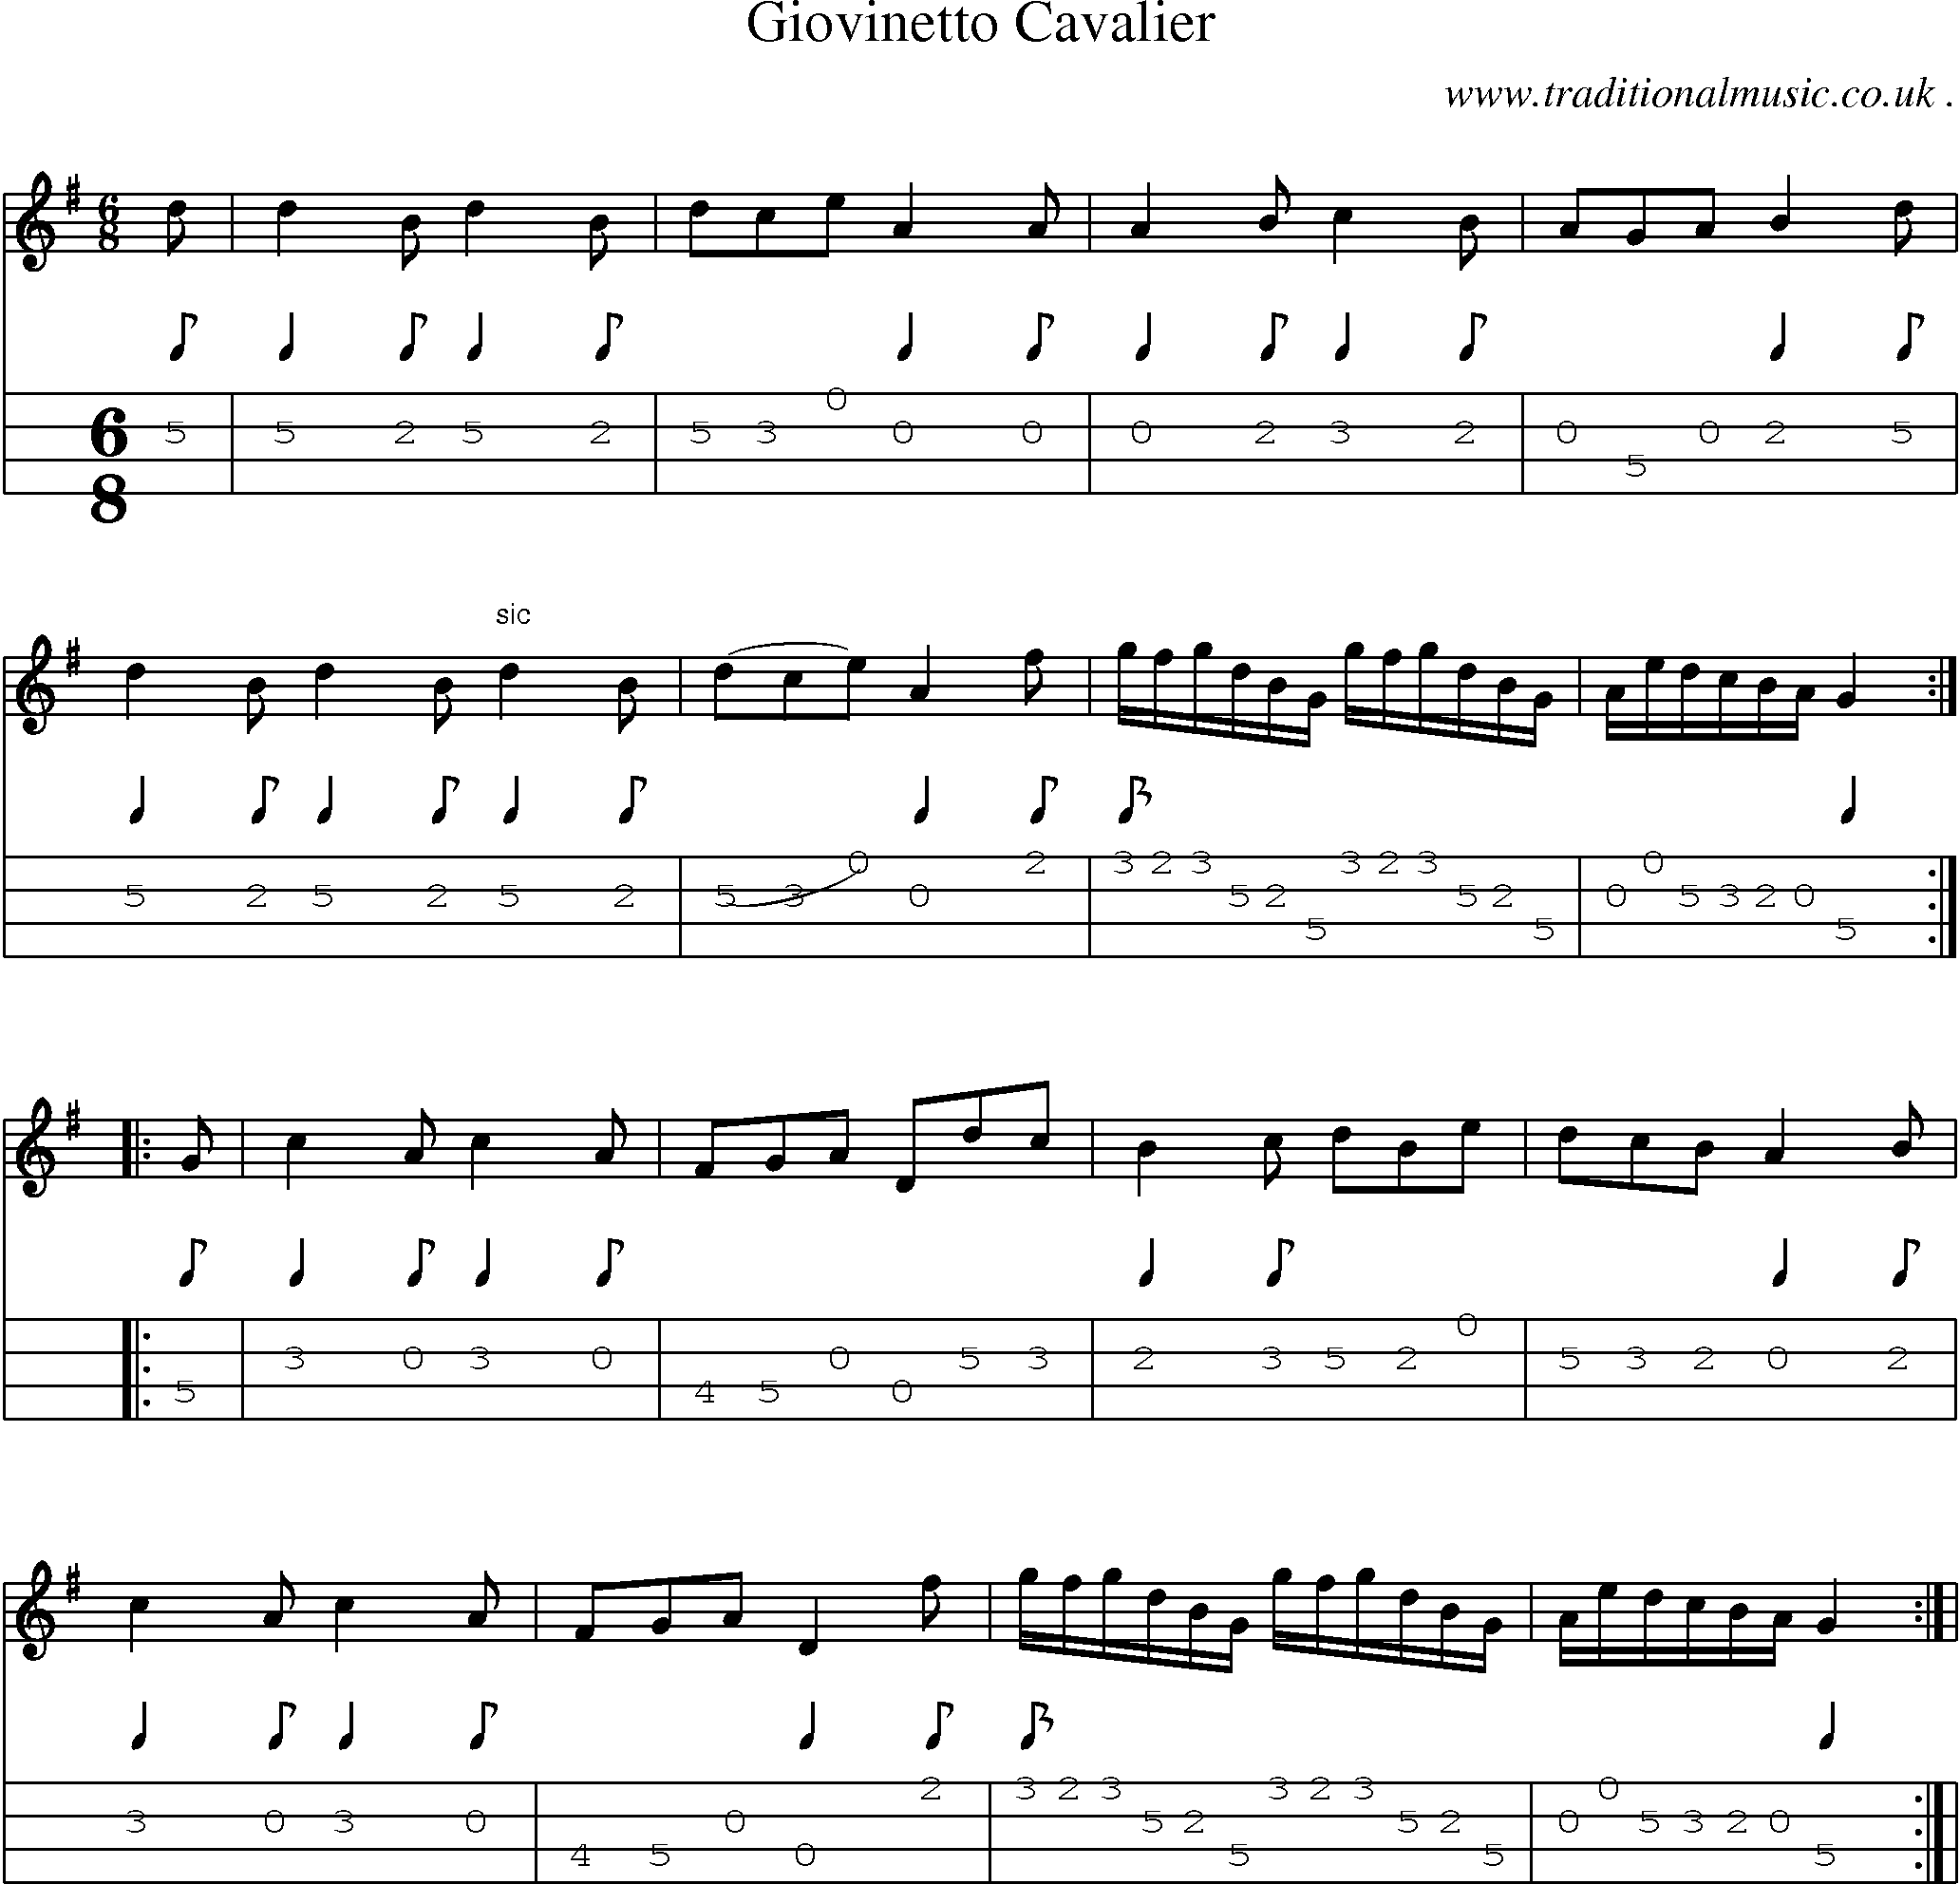 Sheet-Music and Mandolin Tabs for Giovinetto Cavalier